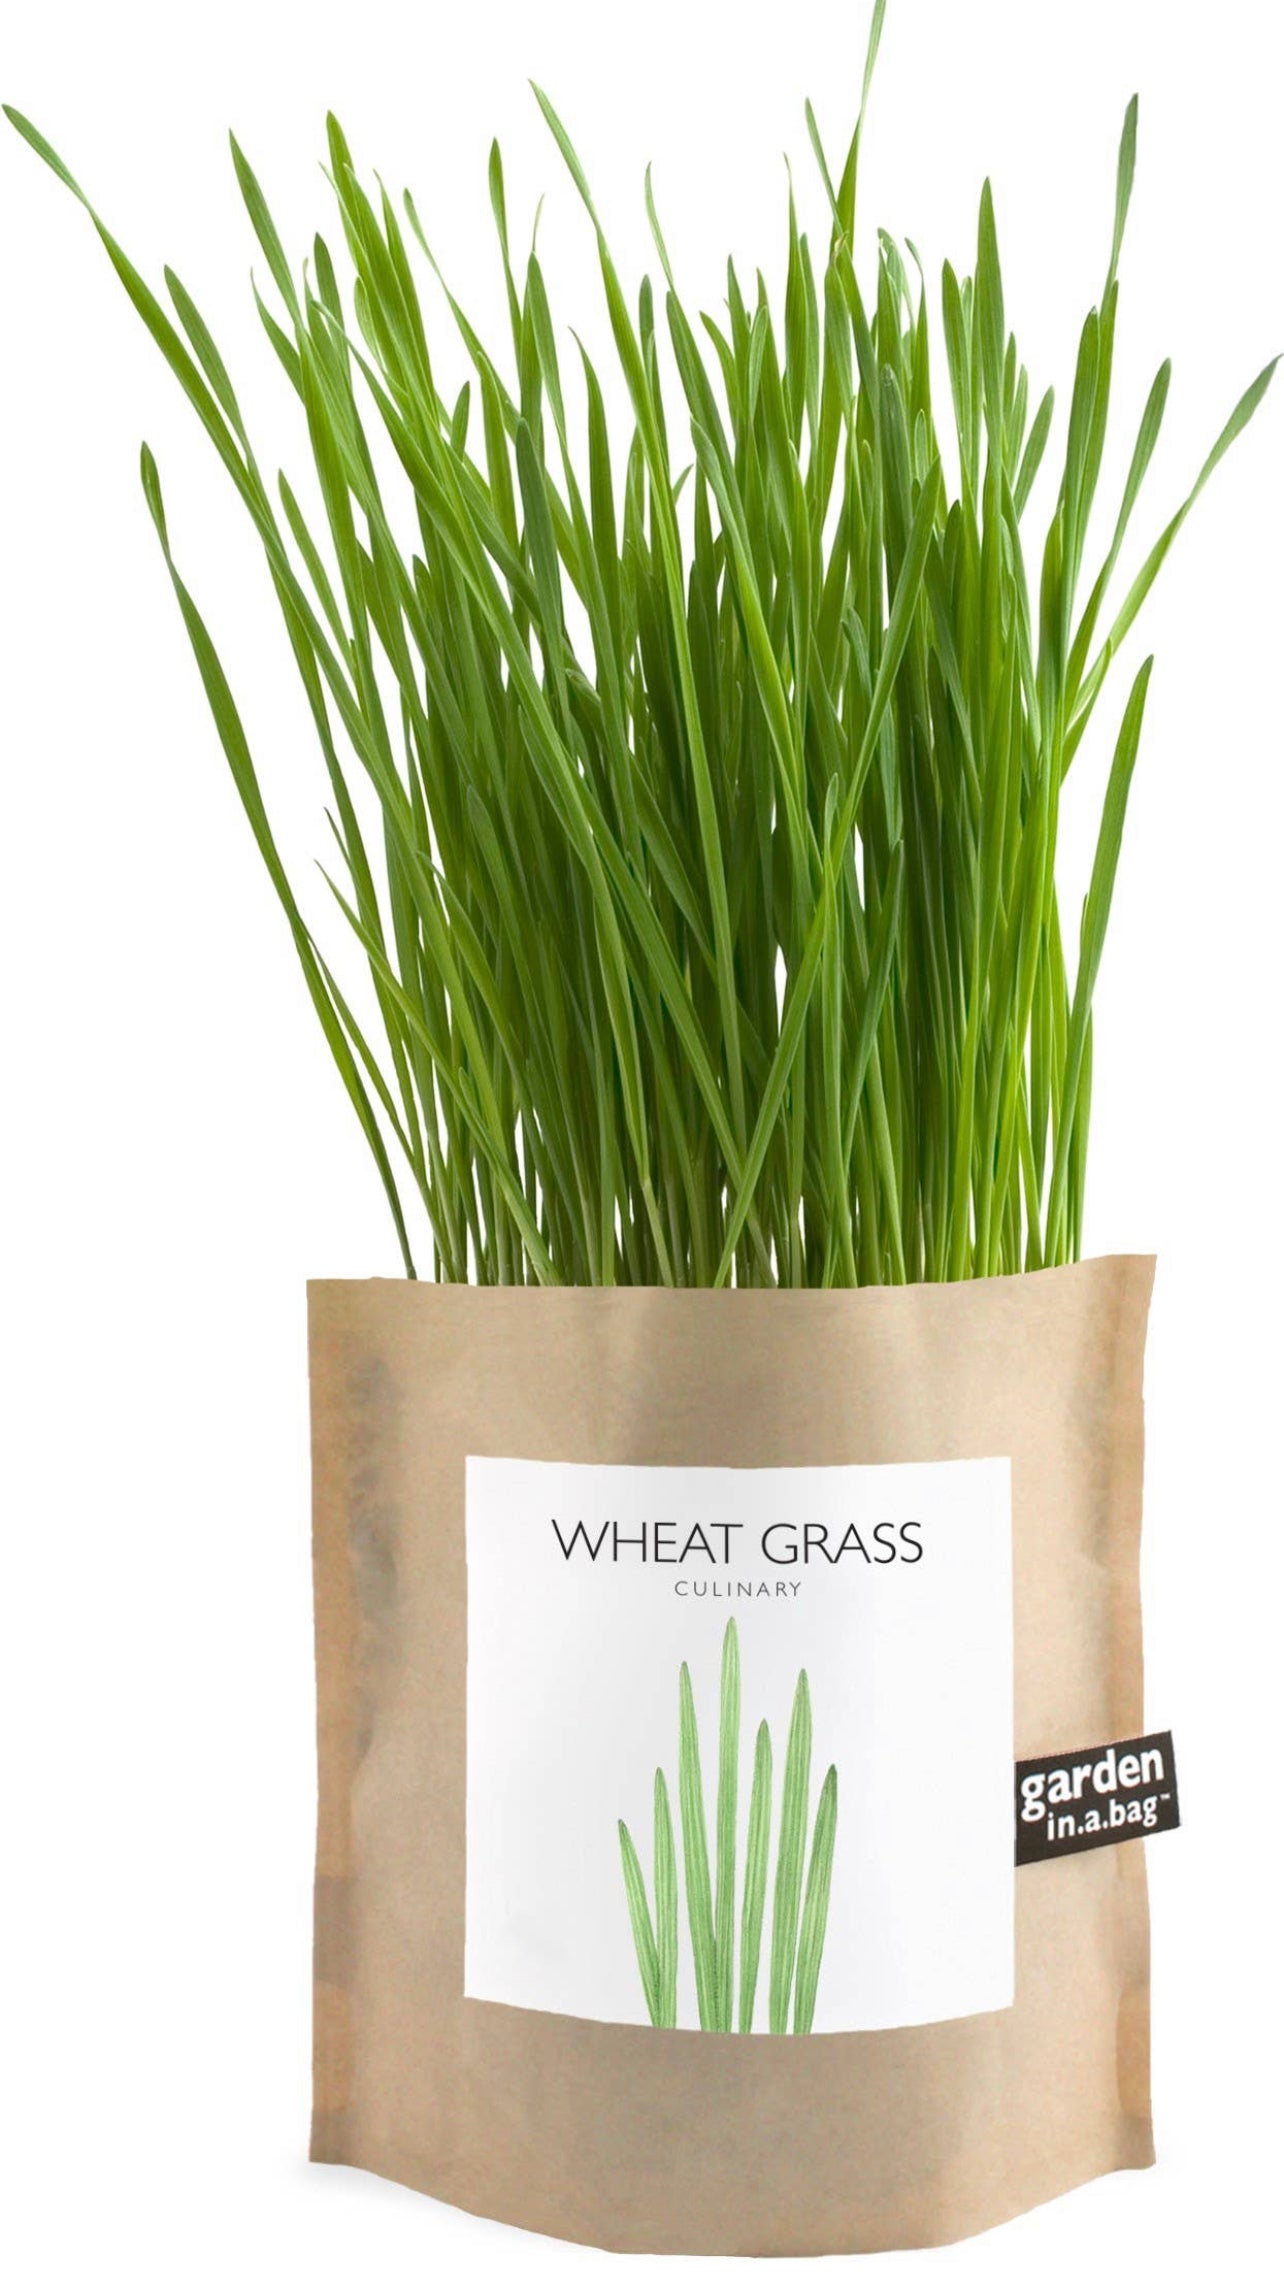 Potting Shed Creations, Ltd. - Garden in a Bag | Wheat Grass